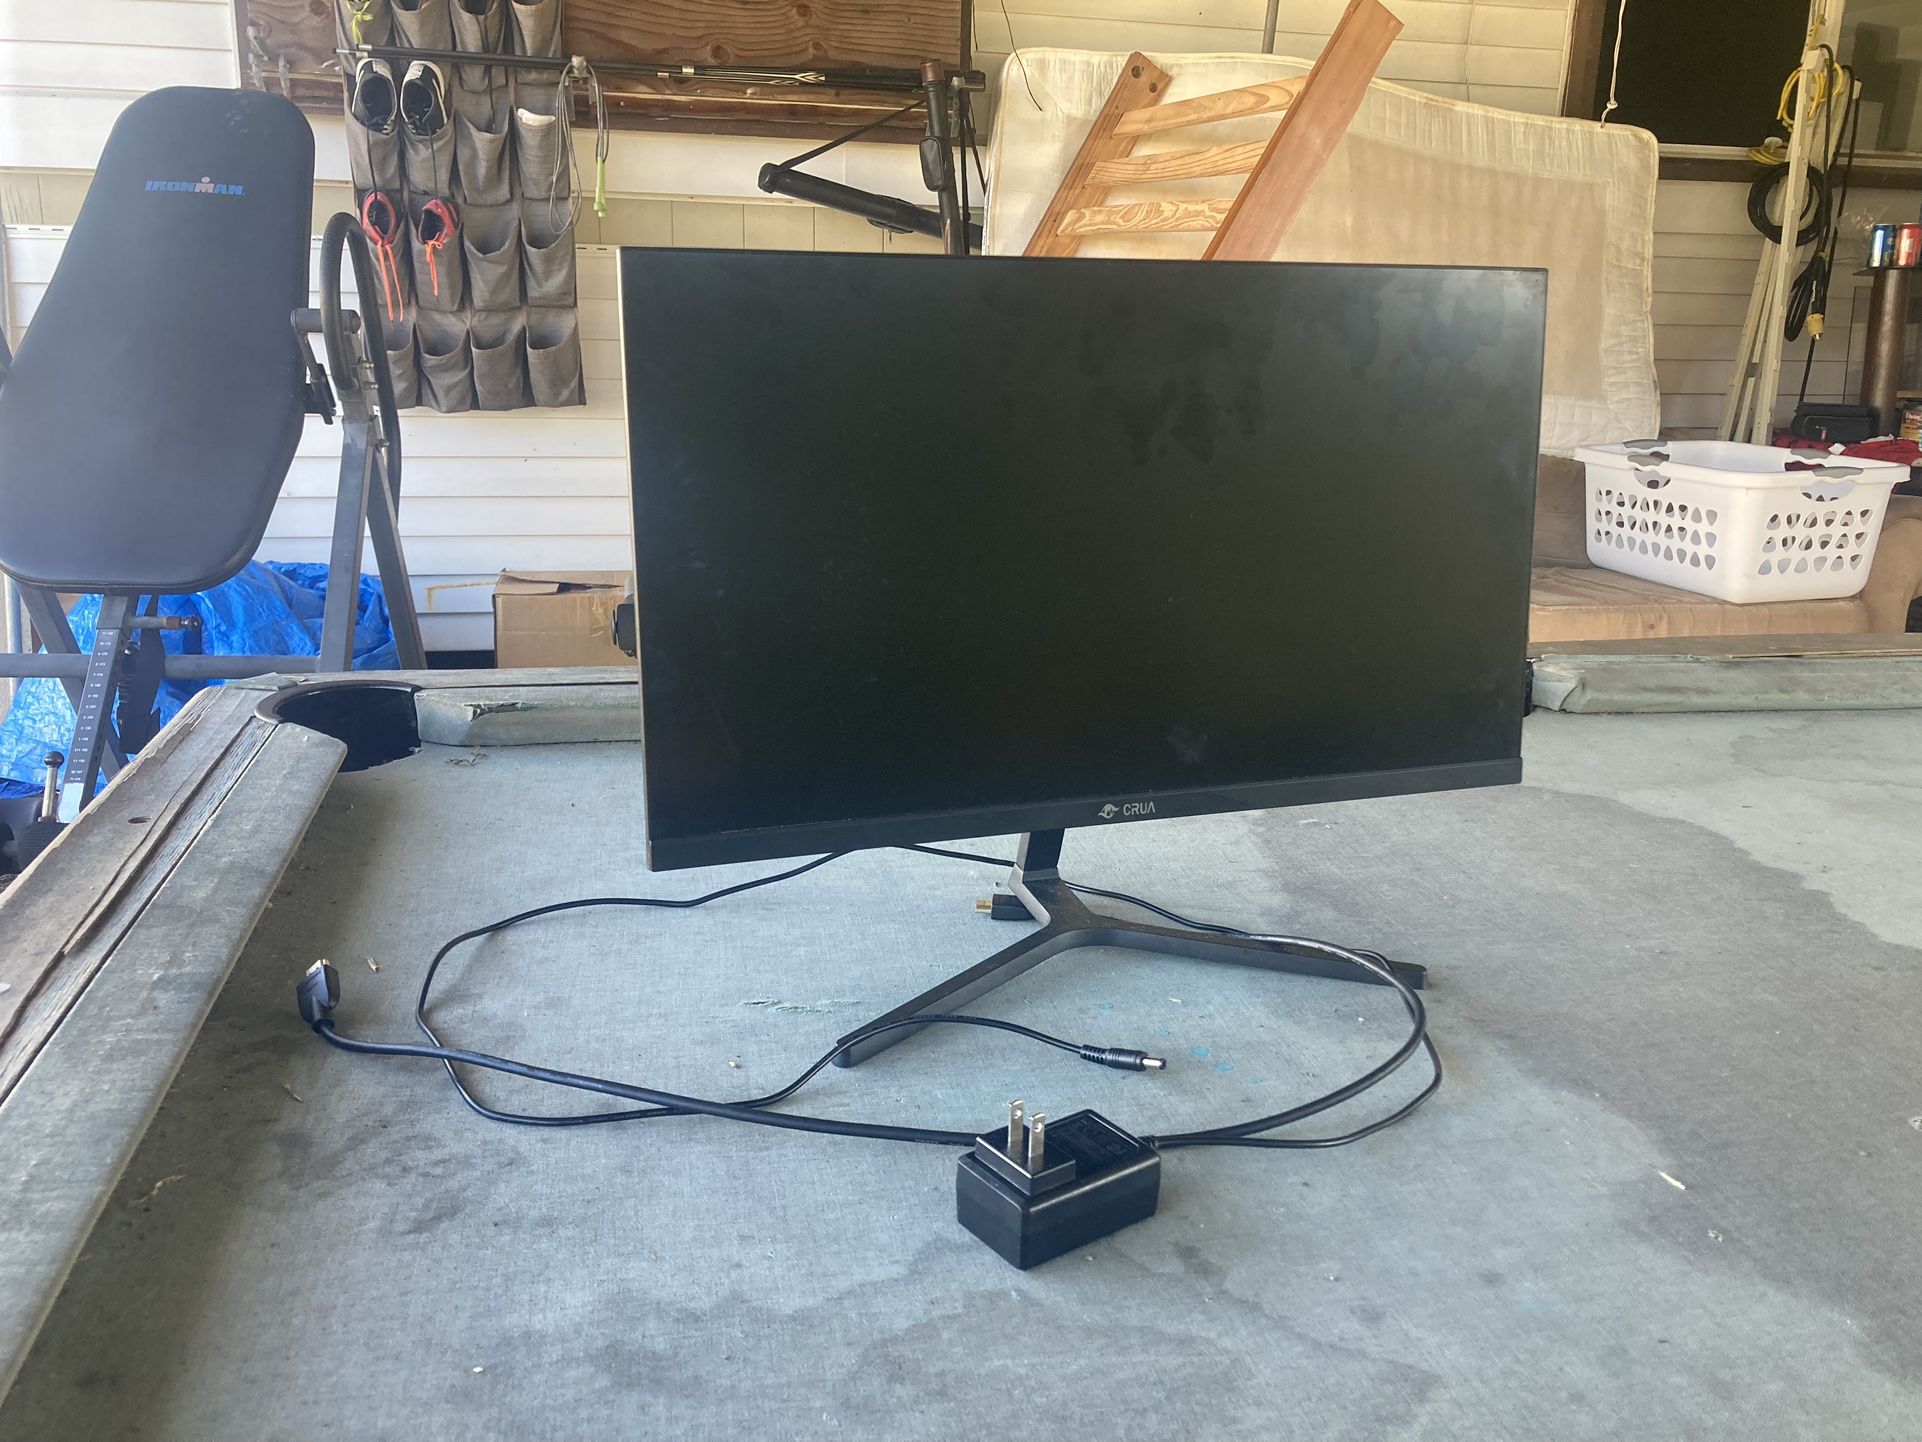 22” Monitor With HDMI Cable